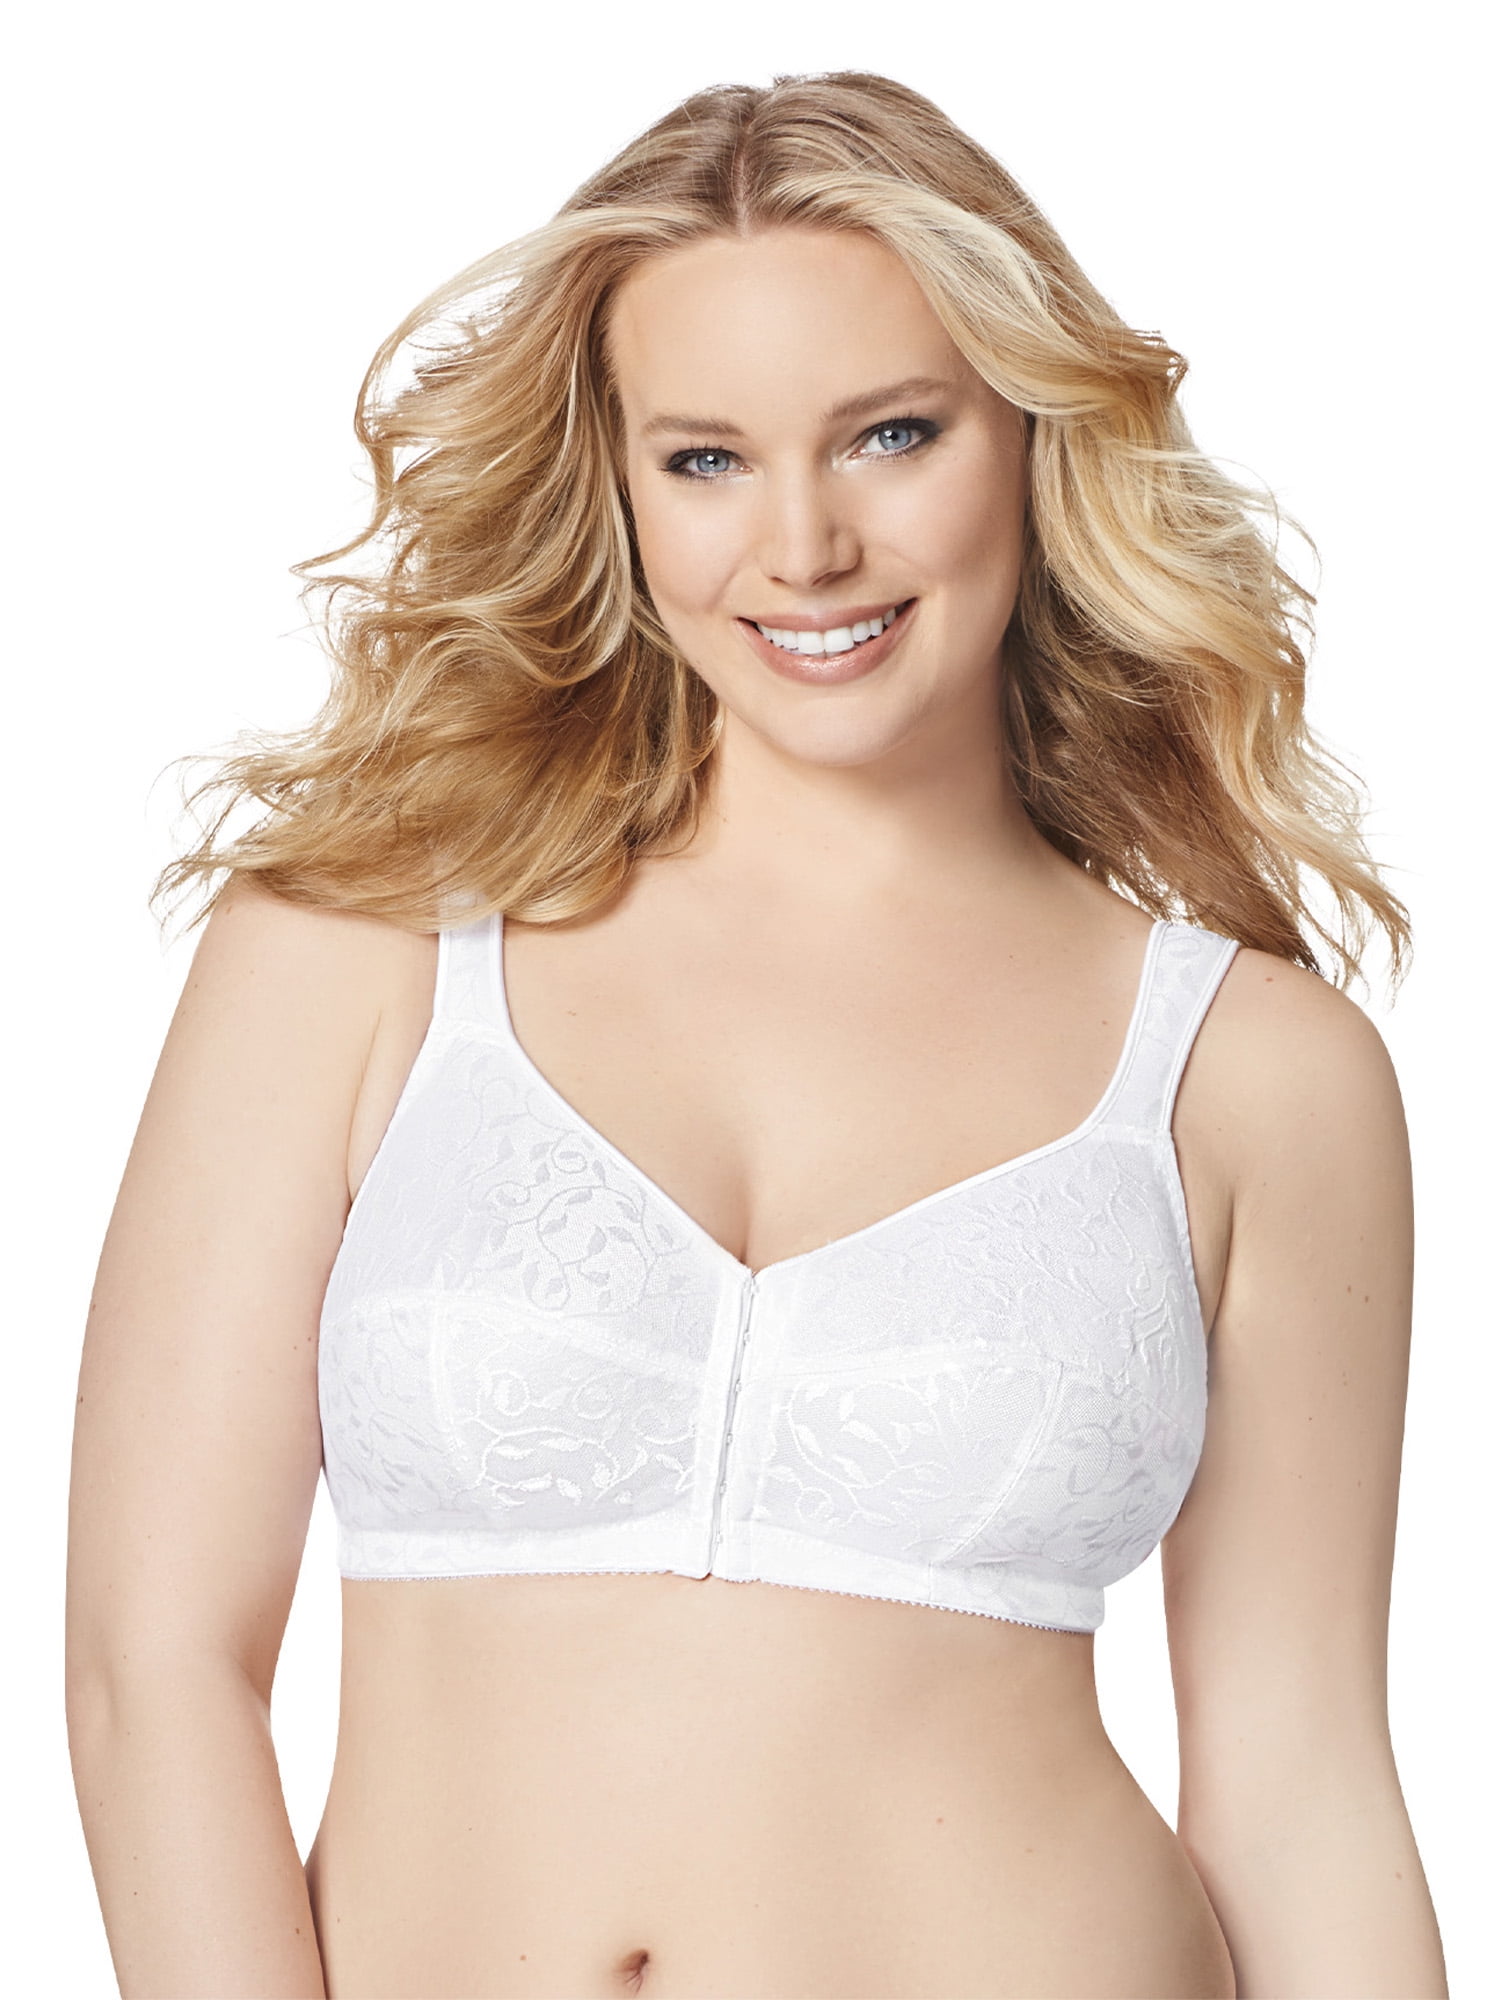 We'll take a closer look at bra cups. The perfect cup size is